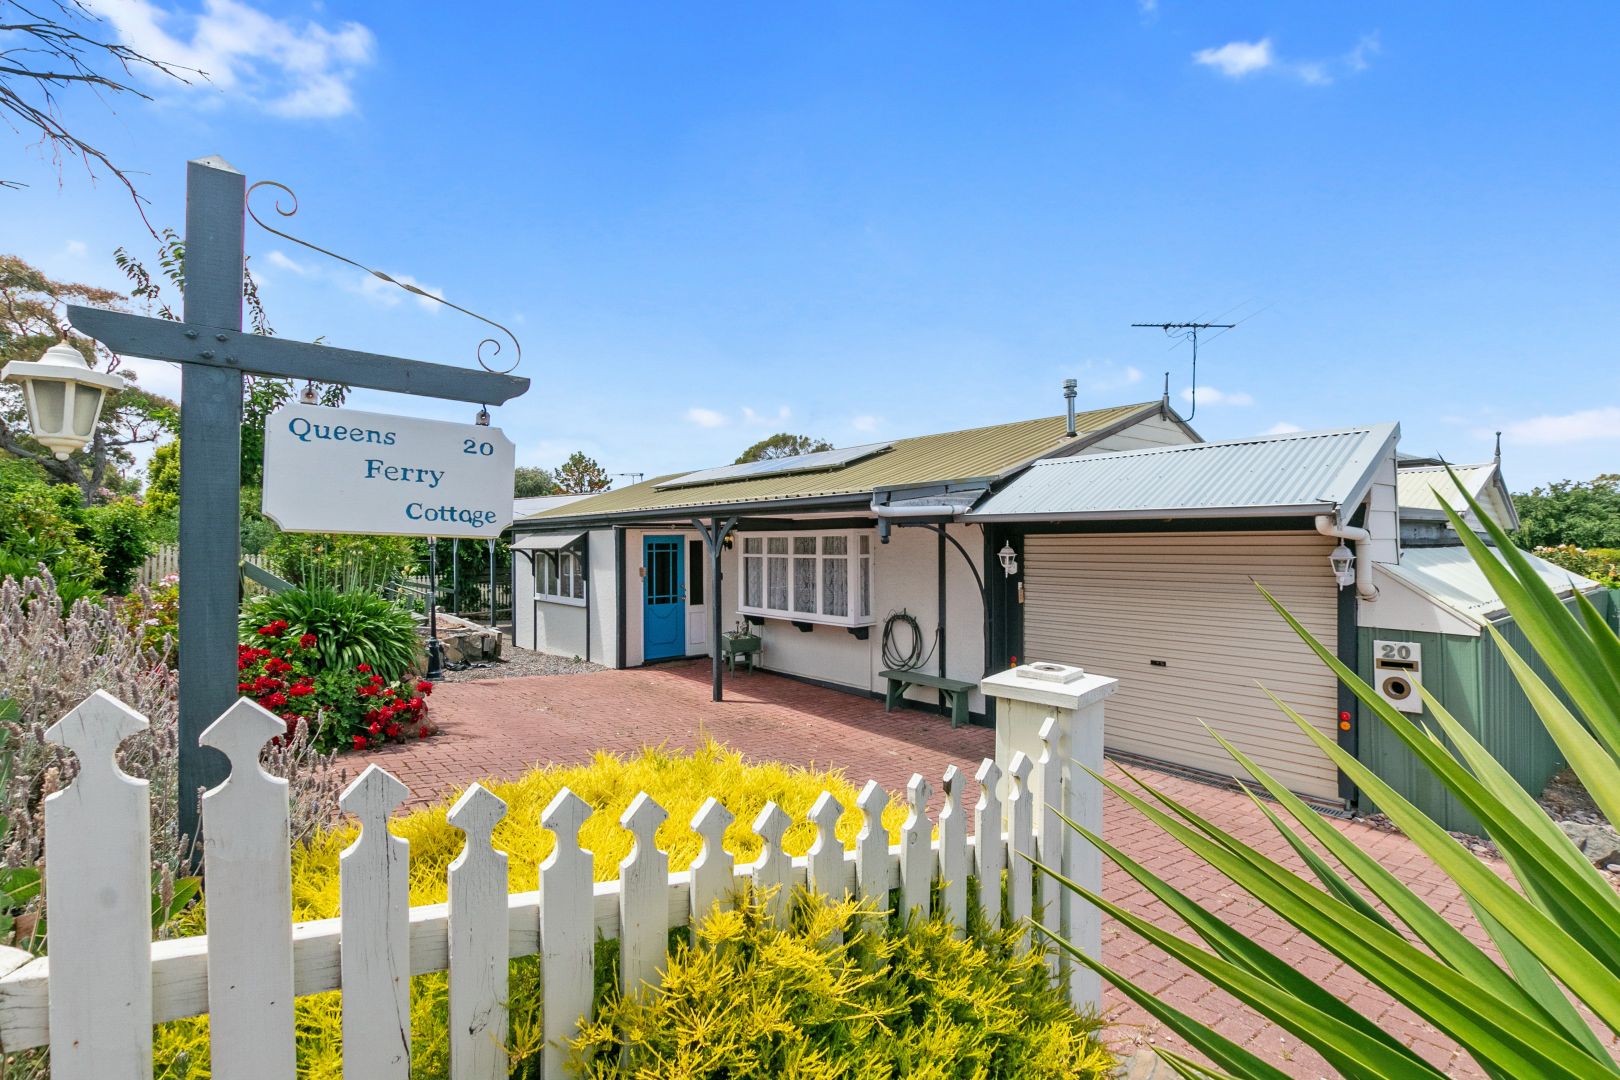 20 Queensferry Road, Old Reynella SA 5161